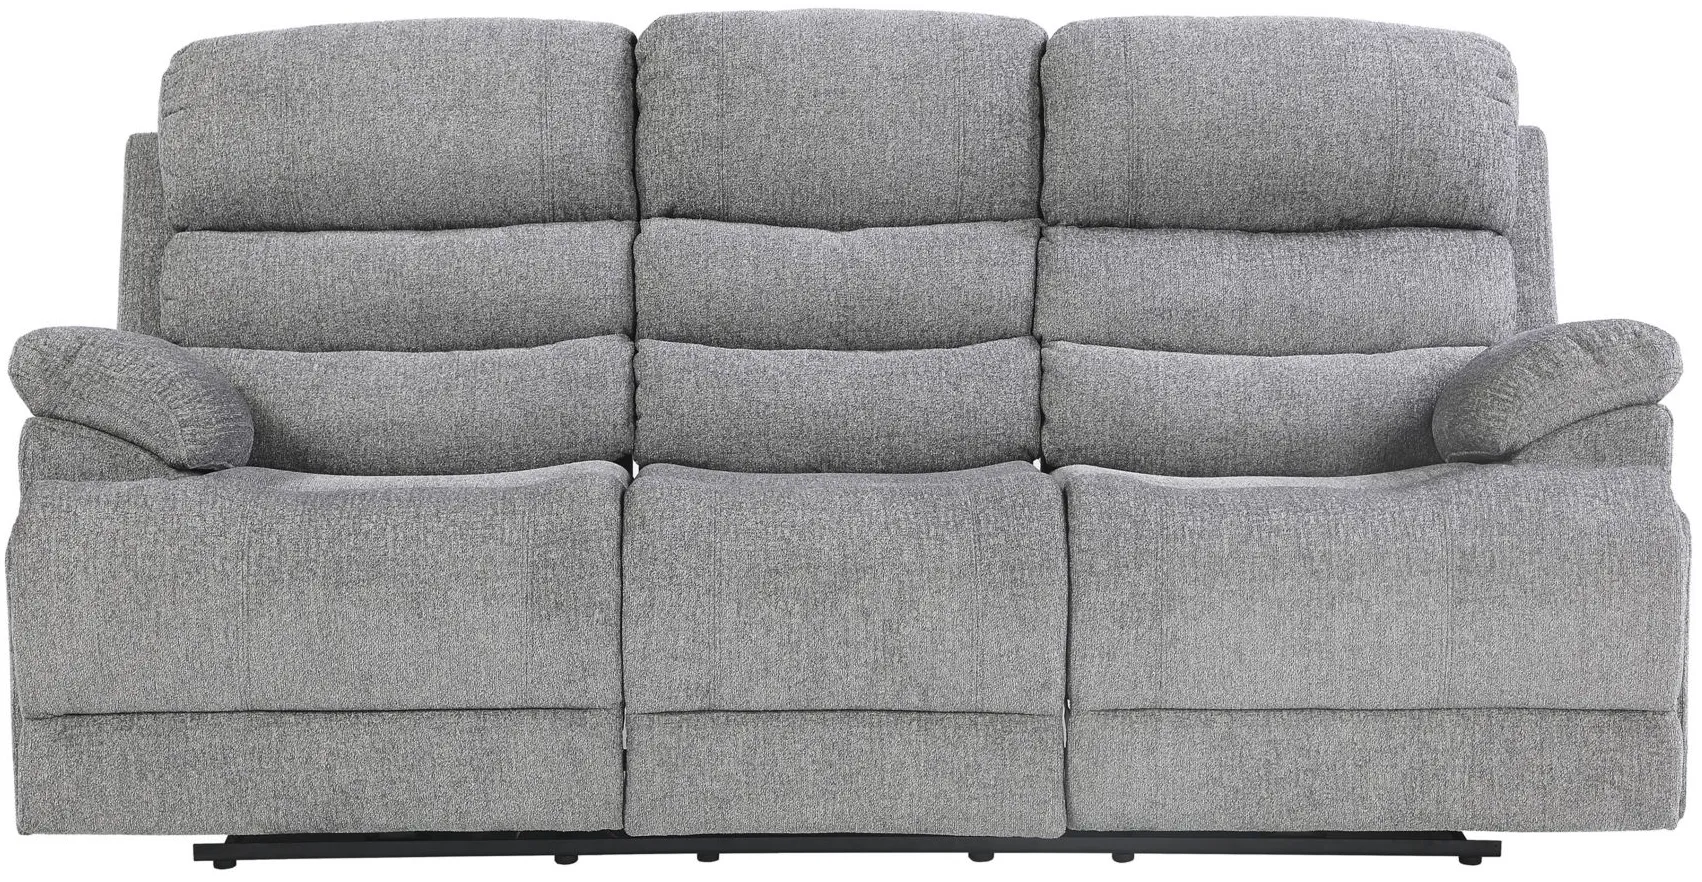 Bryce Double Reclining Sofa in Gray by Homelegance